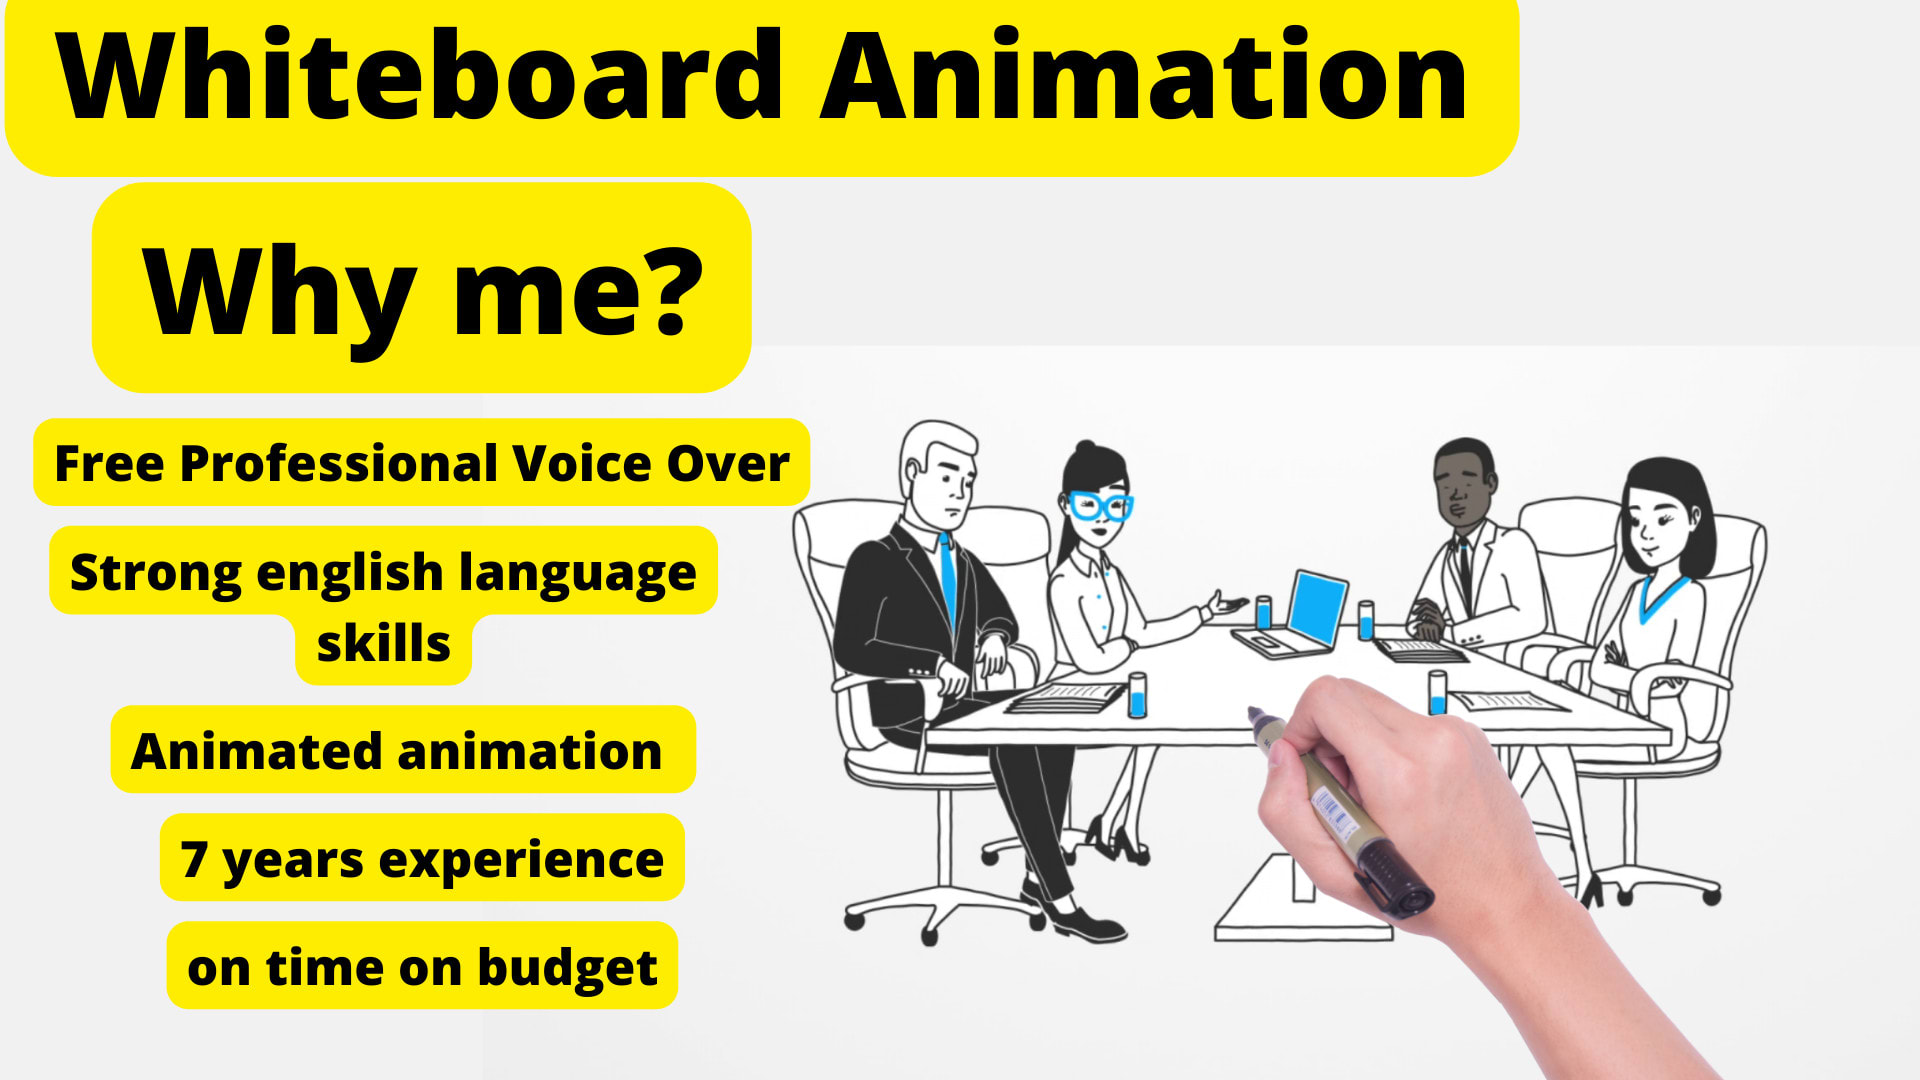 Animated whiteboard animation as your perfect requirements by Timetoup |  Fiverr